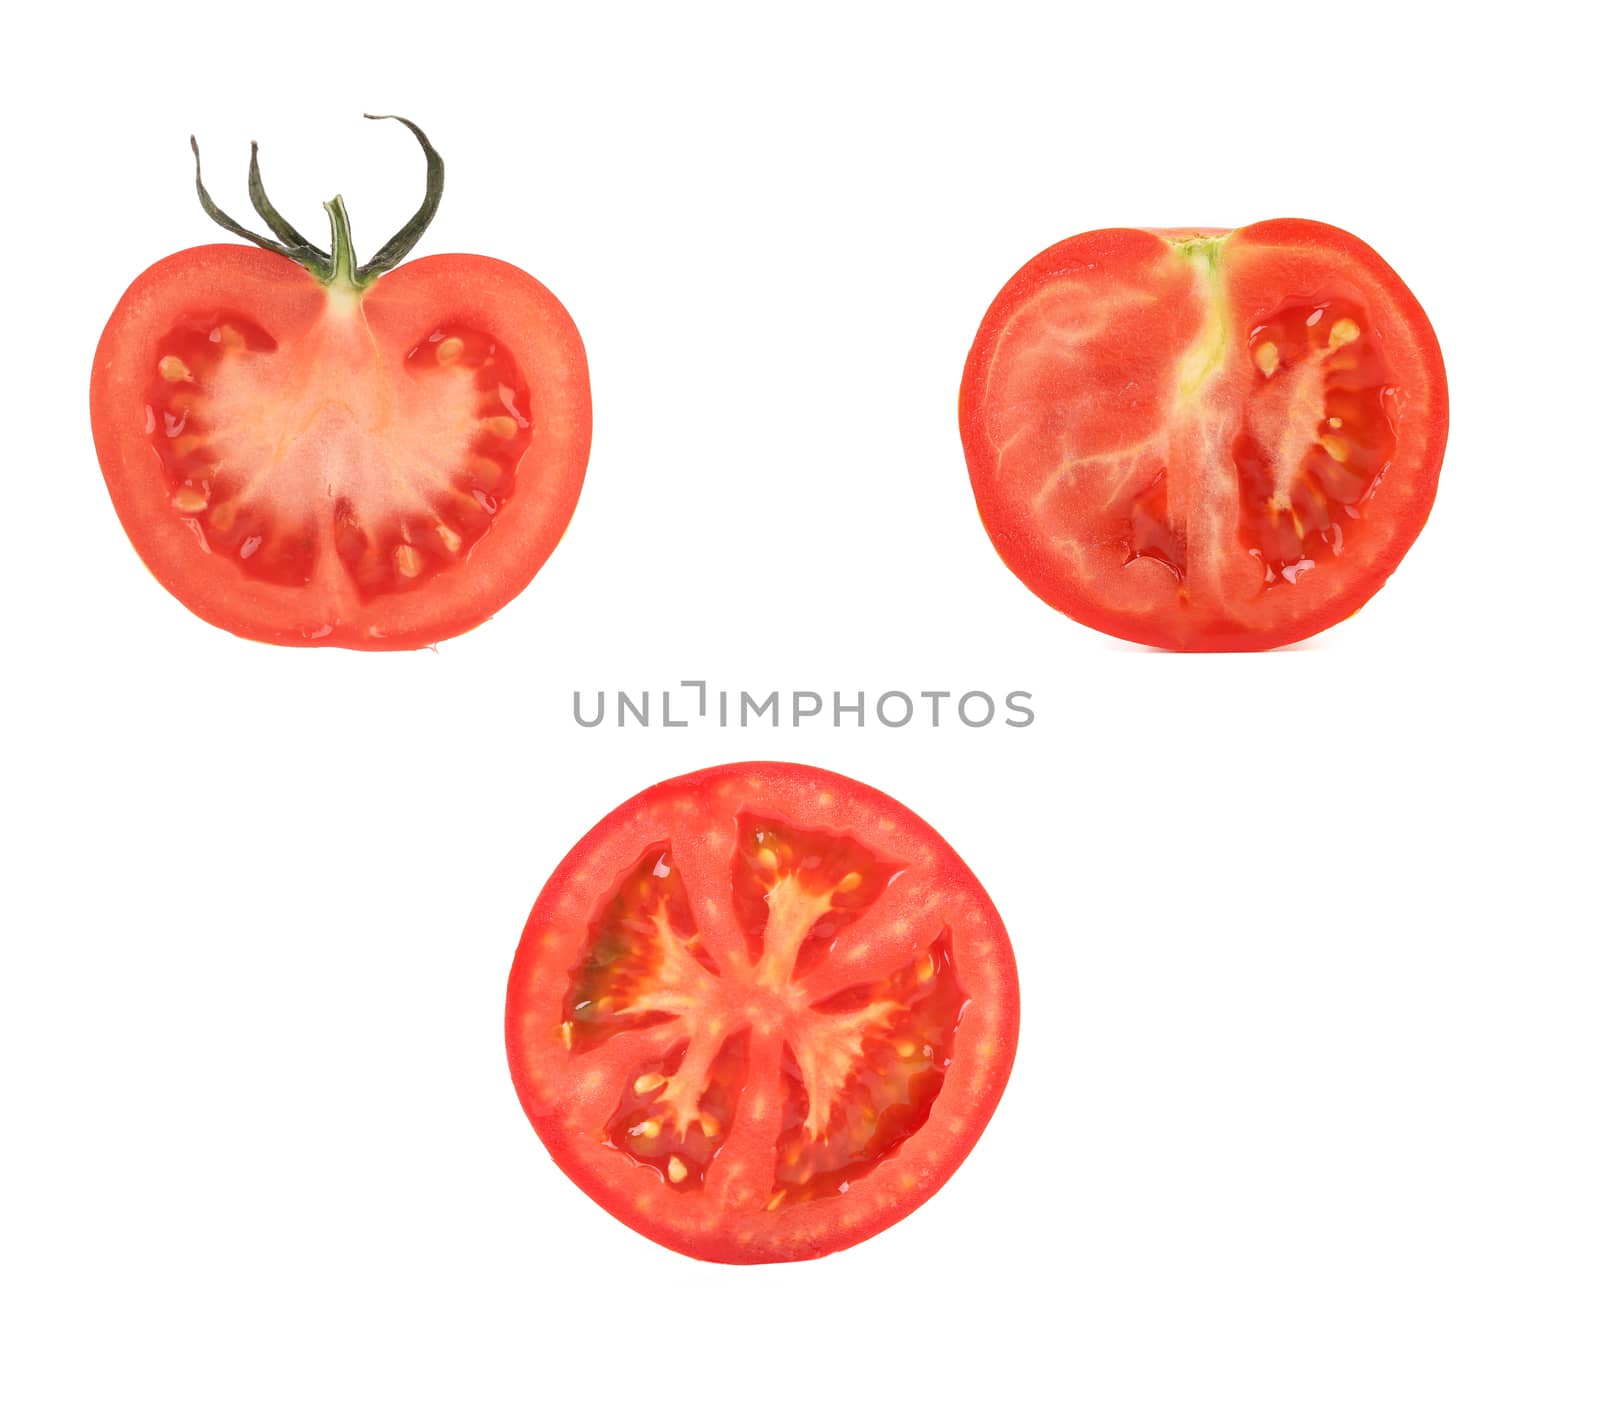 Tomato slices close up. Isolated on a white background.